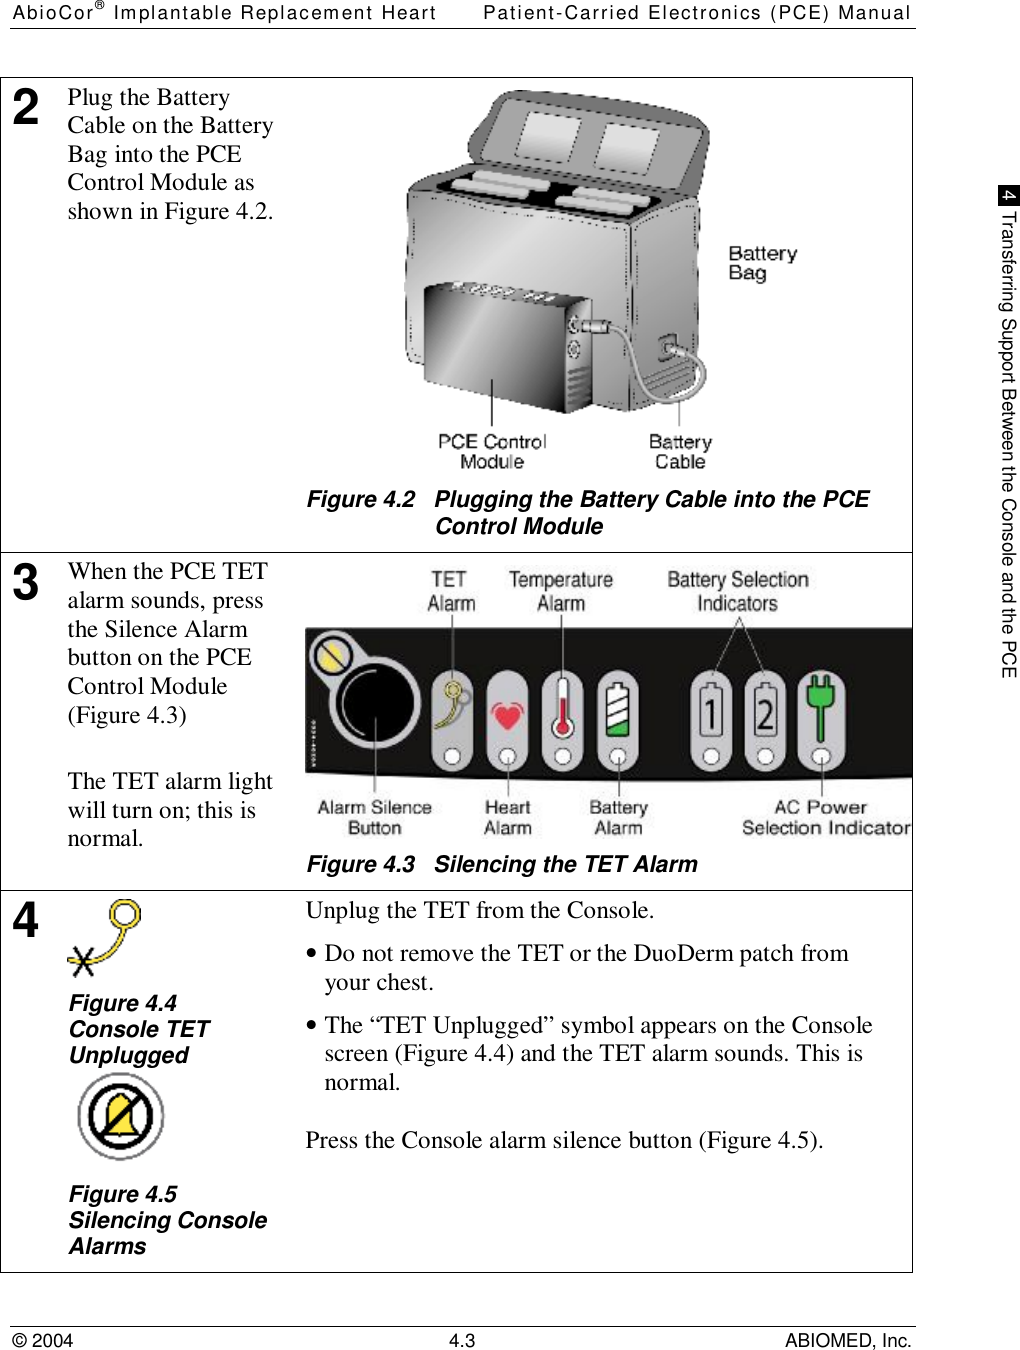 AbioCor® Implantable Replacement Heart Patient-Carried Electronics (PCE) Manual© 2004 4.3 ABIOMED, Inc. 4  Transferring Support Between the Console and the PCE2Plug the BatteryCable on the BatteryBag into the PCEControl Module asshown in Figure 4.2.Figure 4.2   Plugging the Battery Cable into the PCEControl Module3When the PCE TETalarm sounds, pressthe Silence Alarmbutton on the PCEControl Module(Figure 4.3)The TET alarm lightwill turn on; this isnormal. Figure 4.3   Silencing the TET Alarm4Figure 4.4Console TETUnpluggedFigure 4.5Silencing ConsoleAlarmsUnplug the TET from the Console.• Do not remove the TET or the DuoDerm patch fromyour chest.• The “TET Unplugged” symbol appears on the Consolescreen (Figure 4.4) and the TET alarm sounds. This isnormal.Press the Console alarm silence button (Figure 4.5).